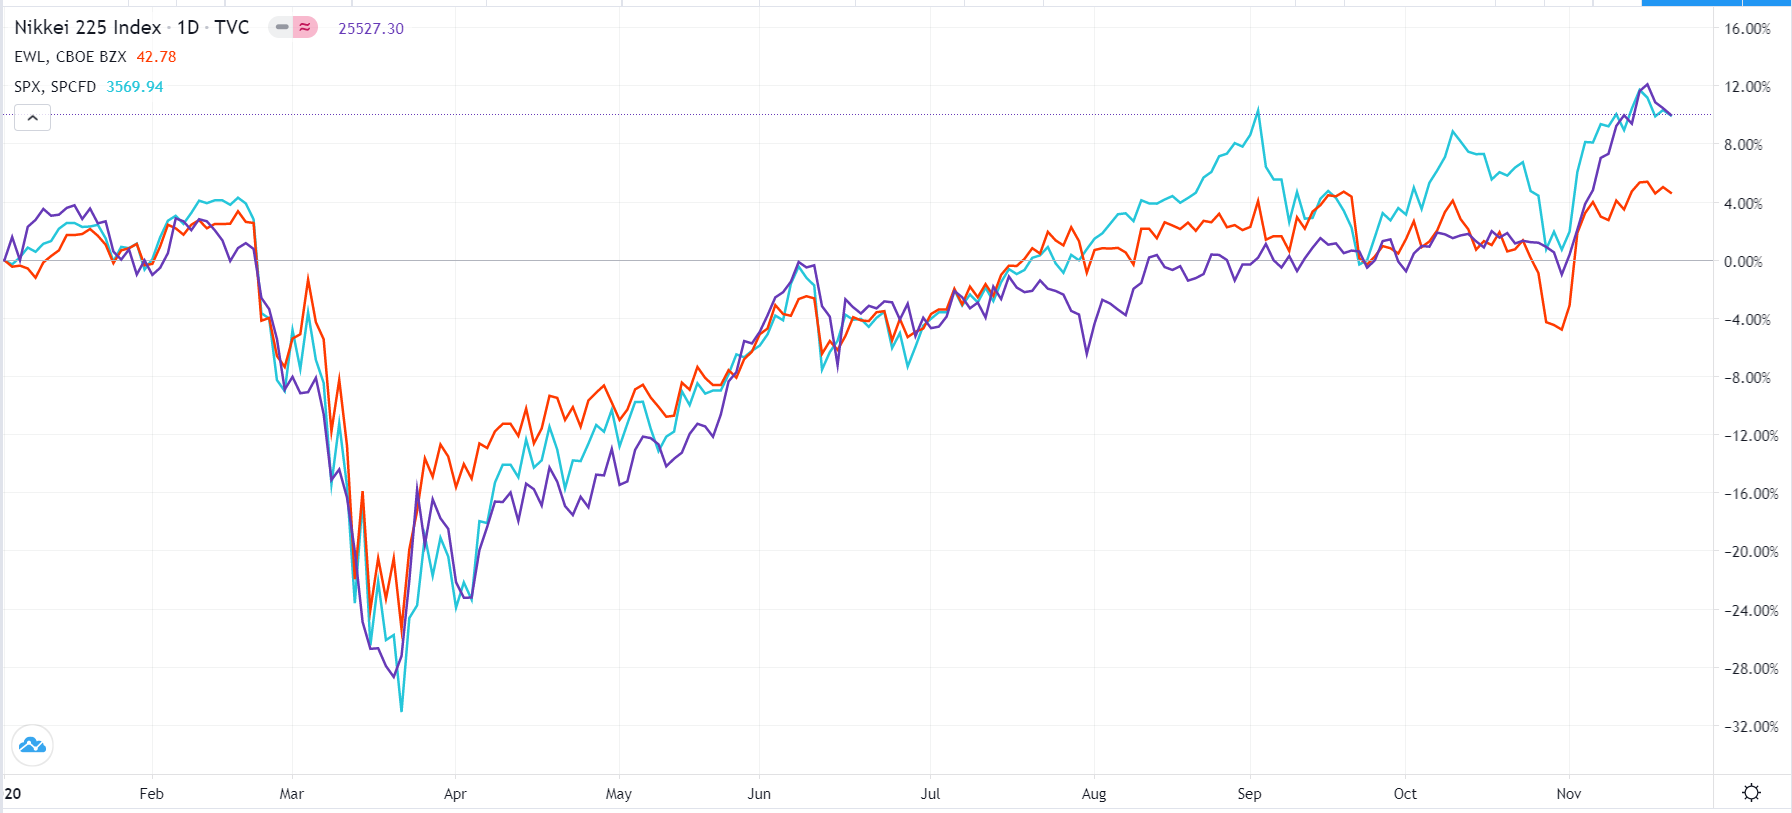 The Nikkei has outperformed the S&P 500 and Dow Jones this year